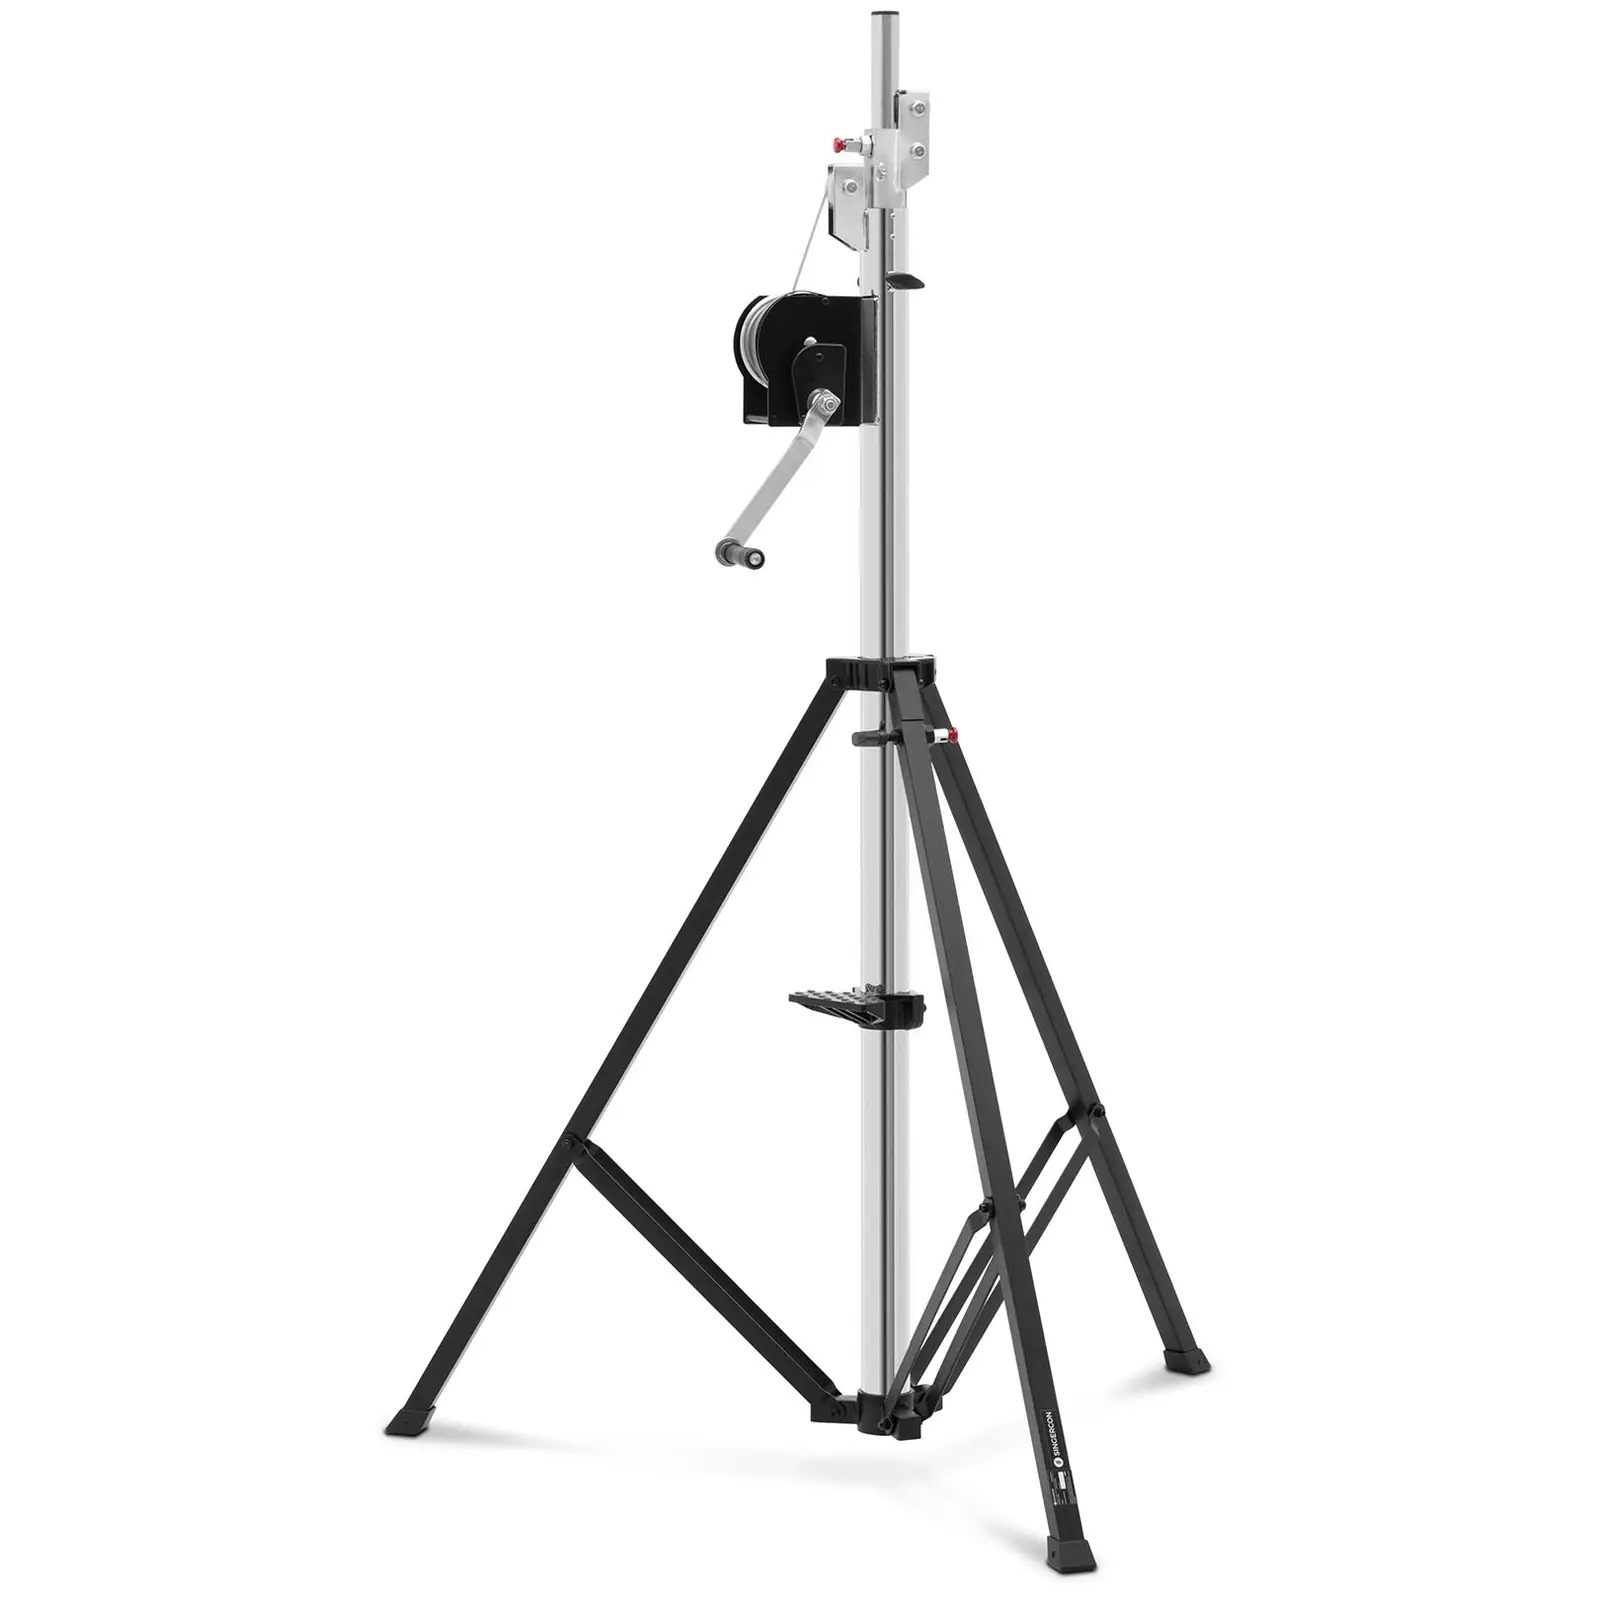 Light stand - up to 80 kg - 1.65 - 4.1 m